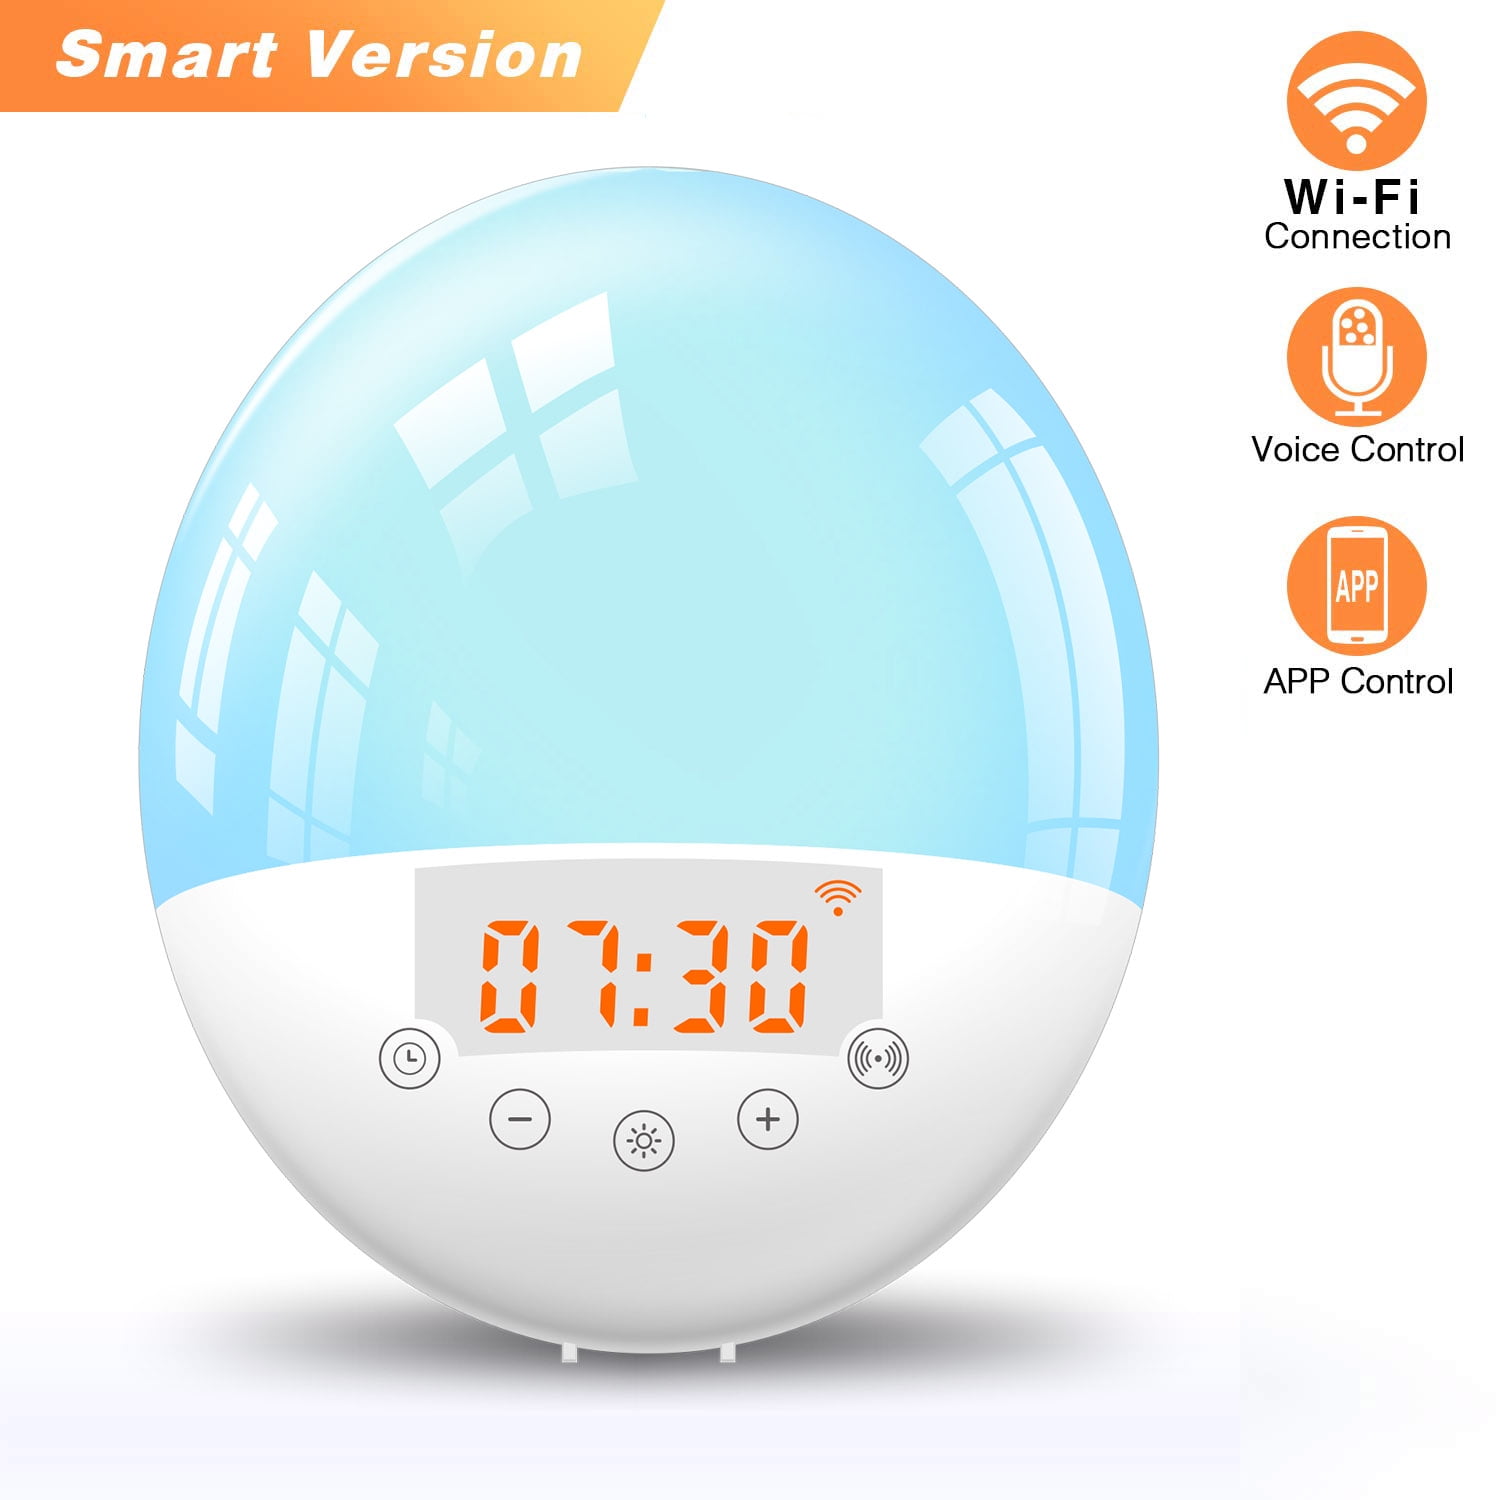 Smart Light Digital Alarm Clock Multifunctional Light Table Lamp Wake Up Light Bedside Lamp With Fm Radio Clock Snooze Function Voice Control App Control Wi Fi Light Compatible With Home Walmart Com